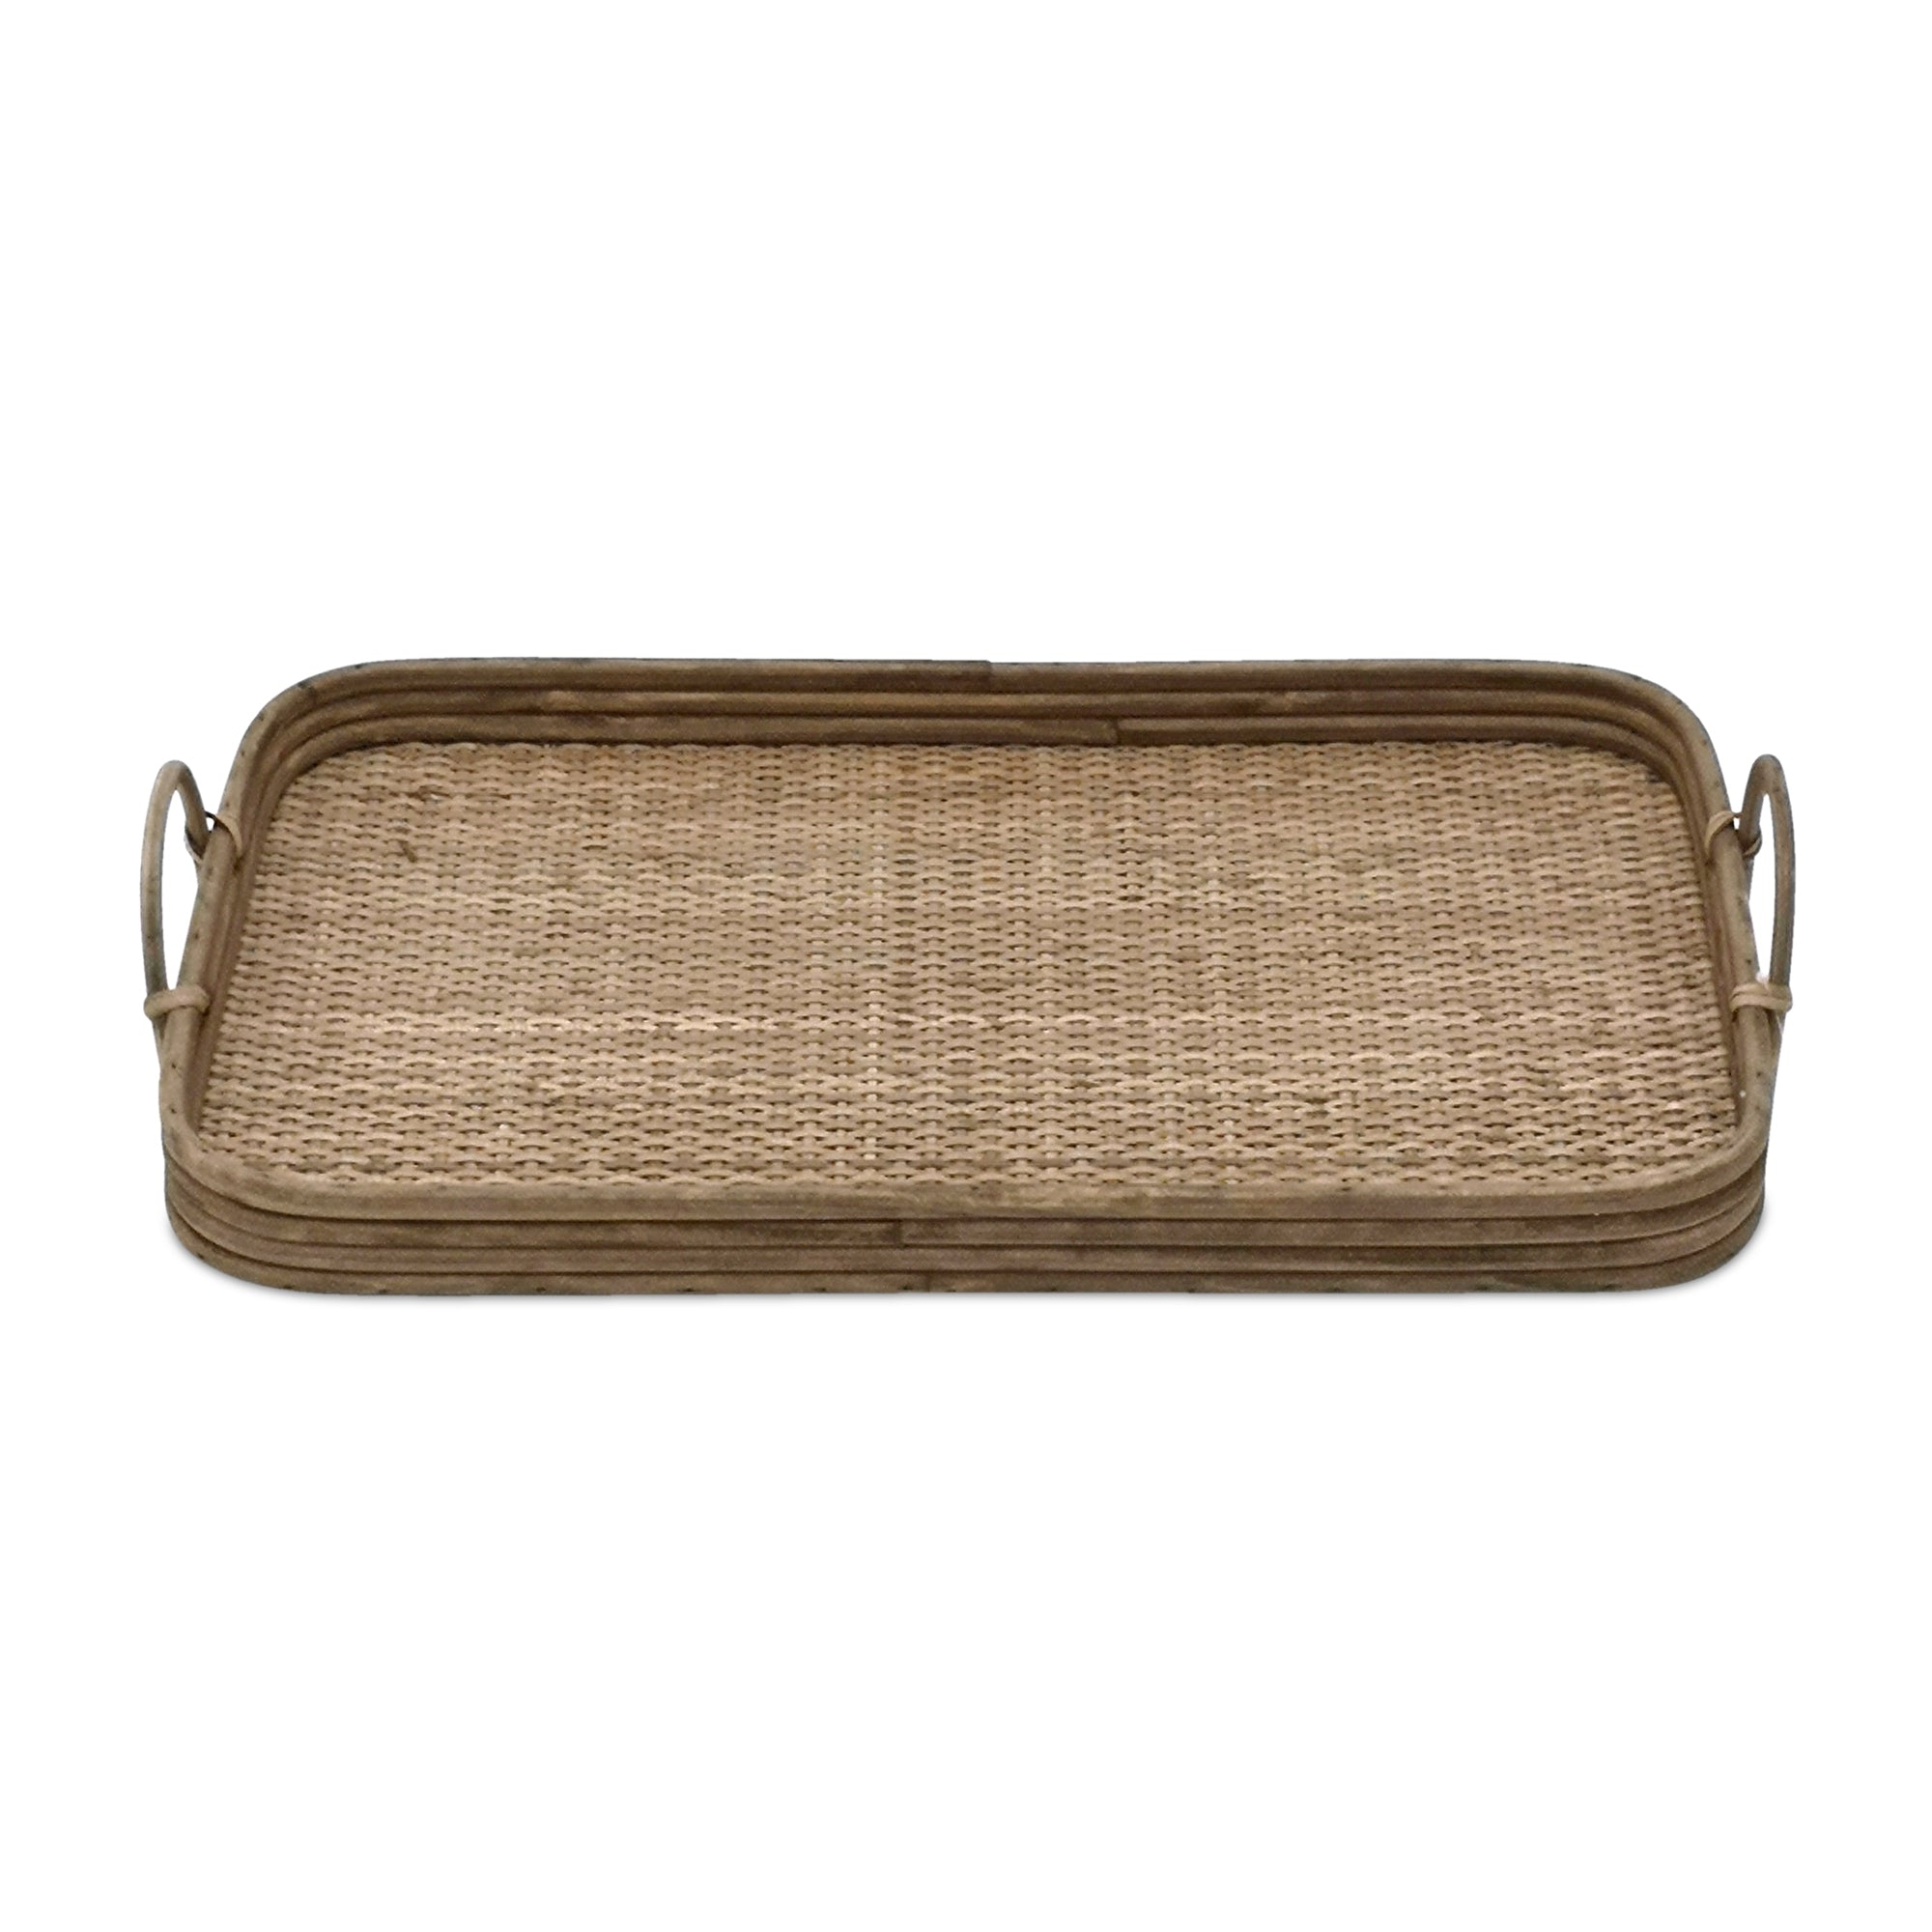 Woven Rattan Tray with Handles, Set of 2 - Decorative Trays